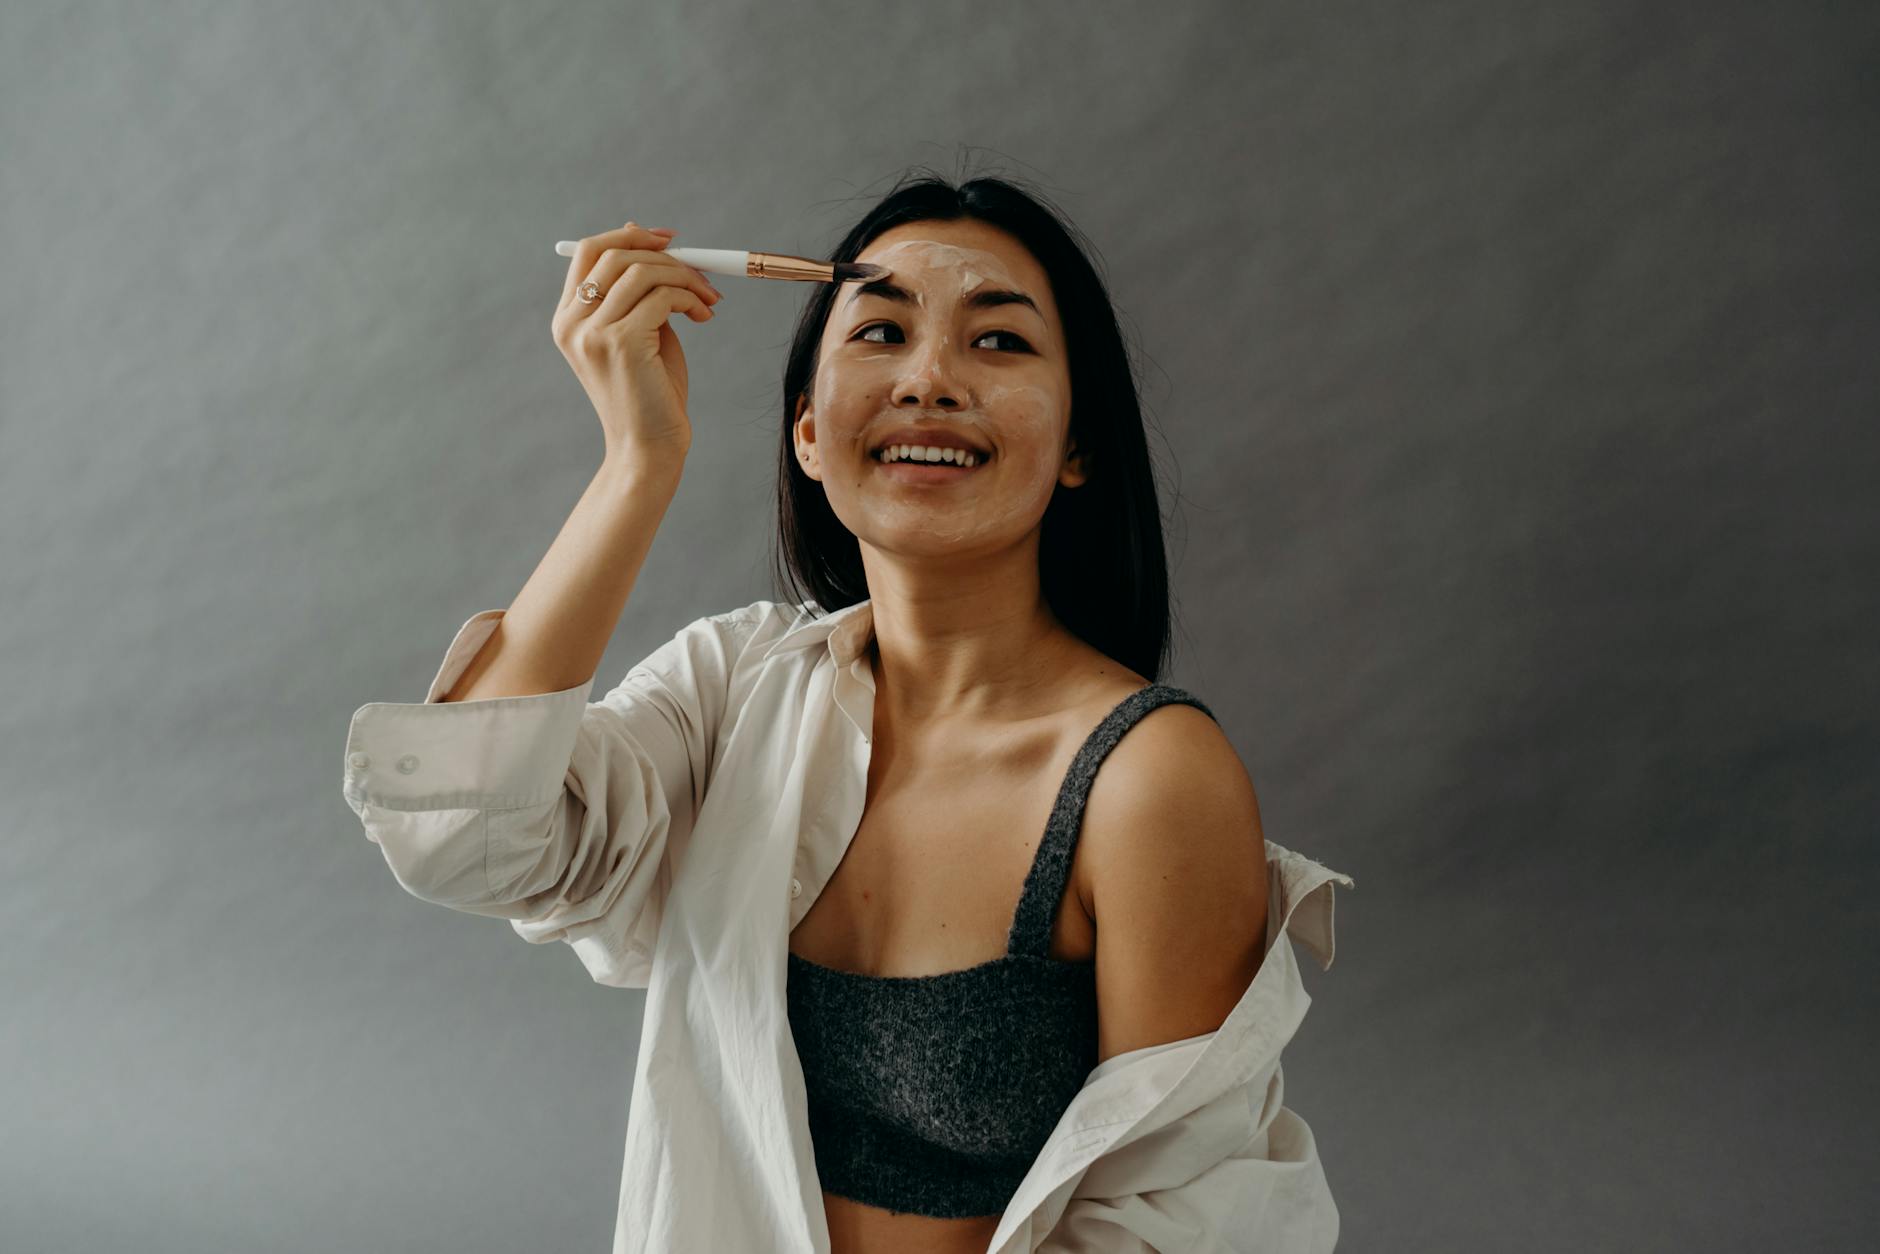 A Woman in White Long Sleeves and Gray Tank Top Smiling while Applying a Cream on Her Face